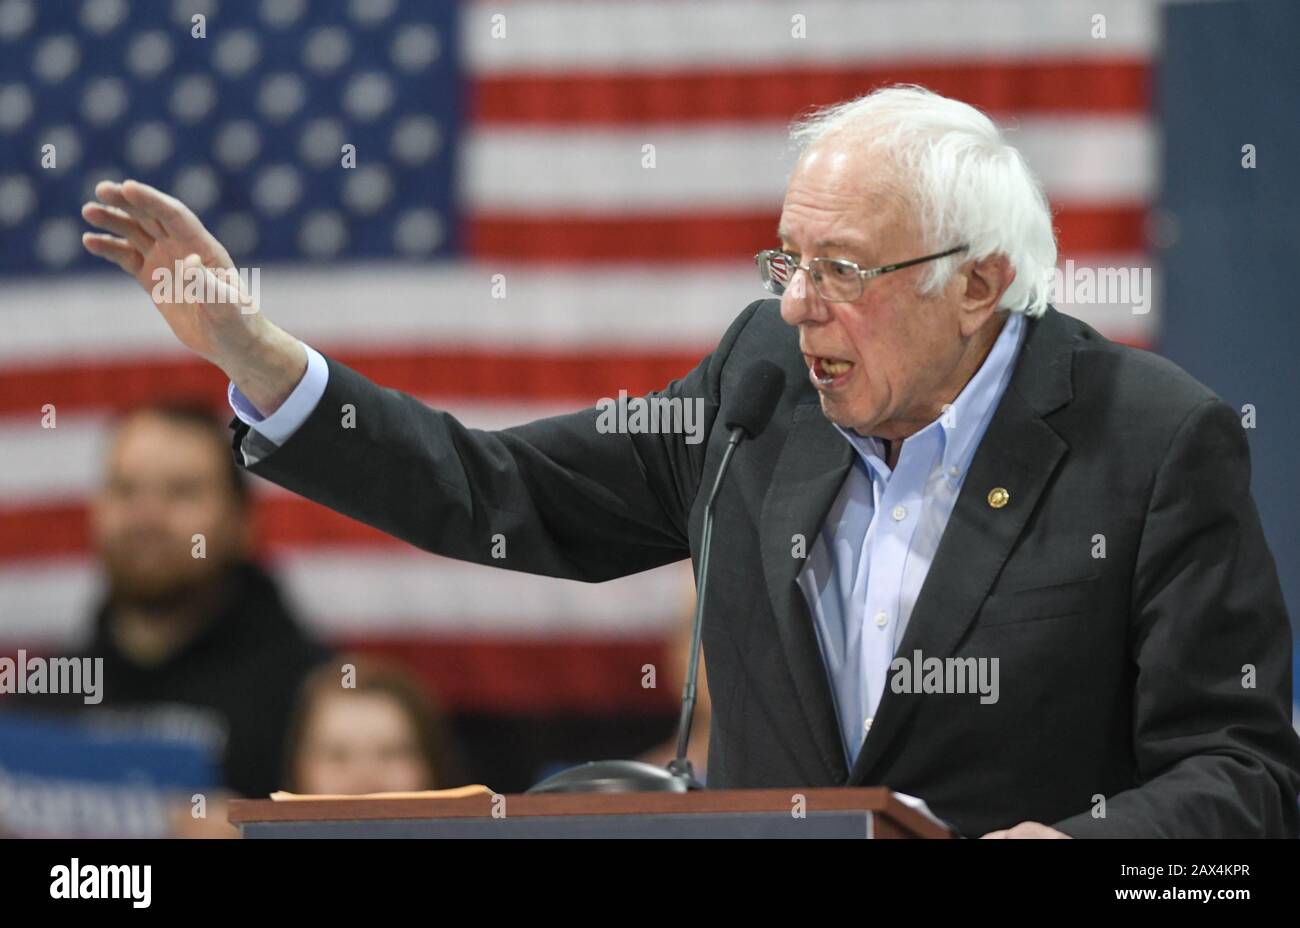 U.S. Senator Bernie Sanders, Independent of Vermont, speaks in Ringe, N.H., USA, during the New Hampshire presidential primary campaign. Stock Photo